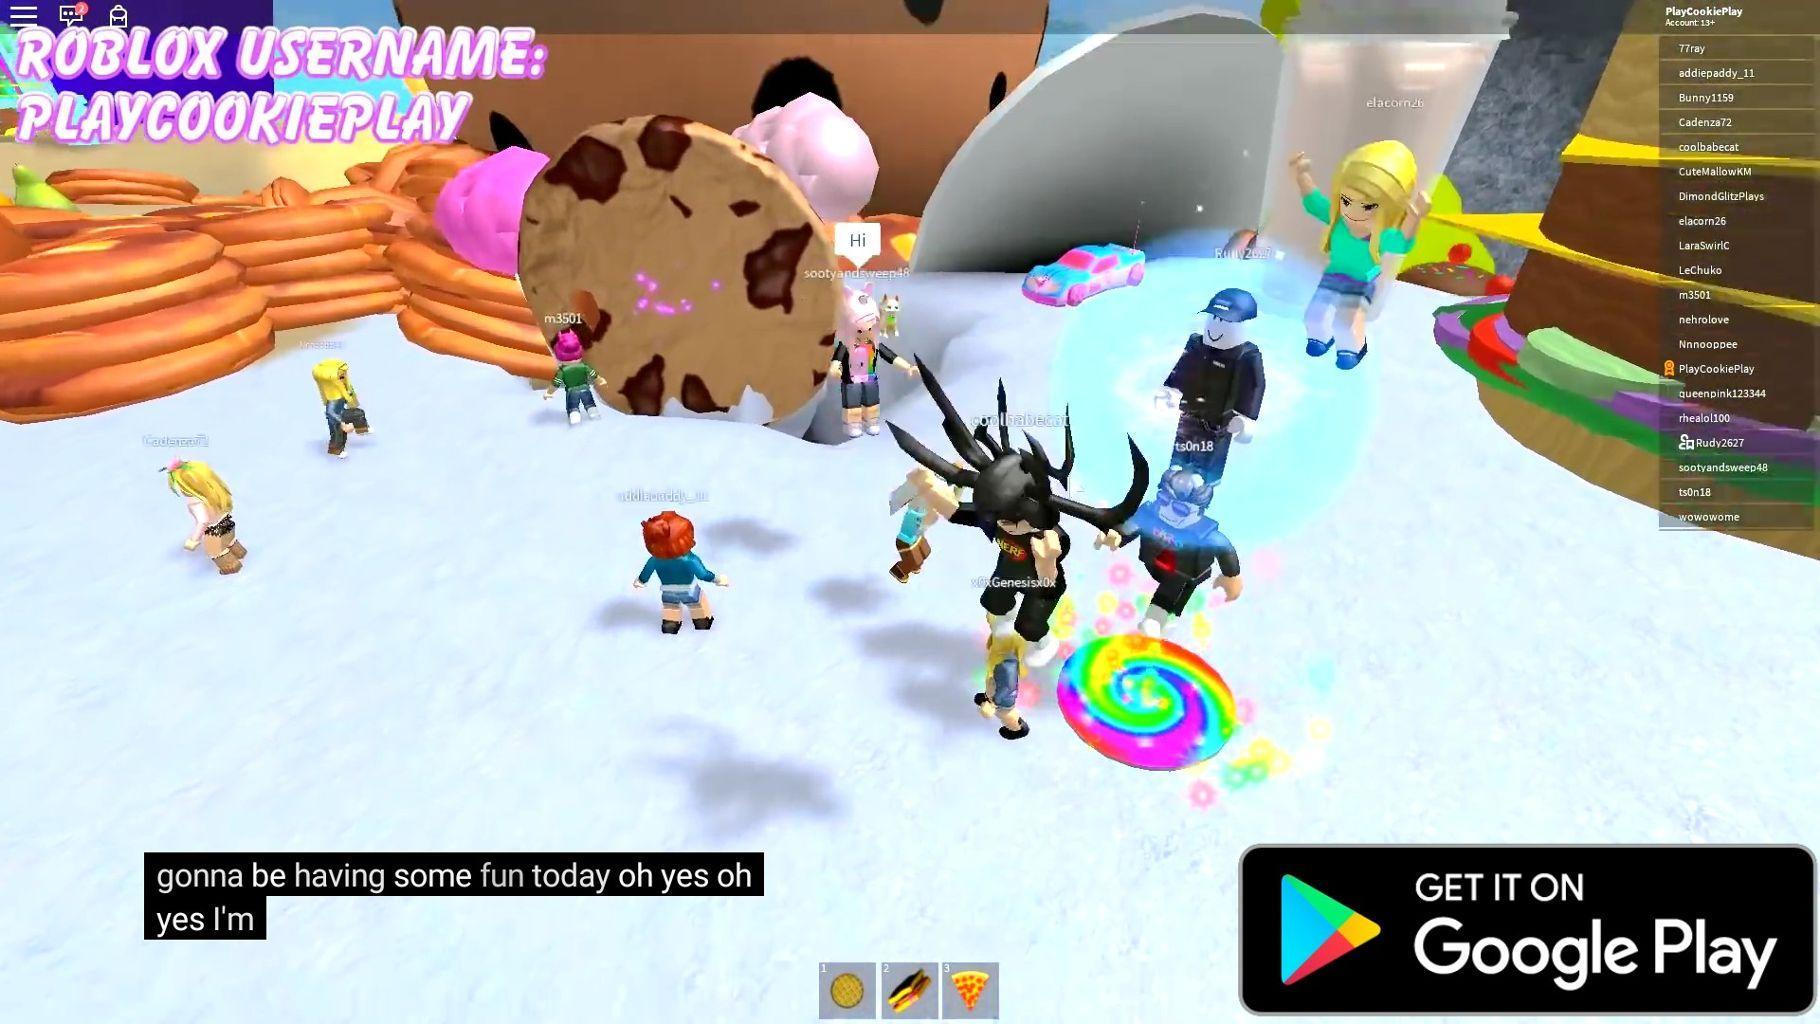 Guide For Cookie Swirl C Roblox For Android Apk Download - tips of cookie swirl c roblox new free android app market